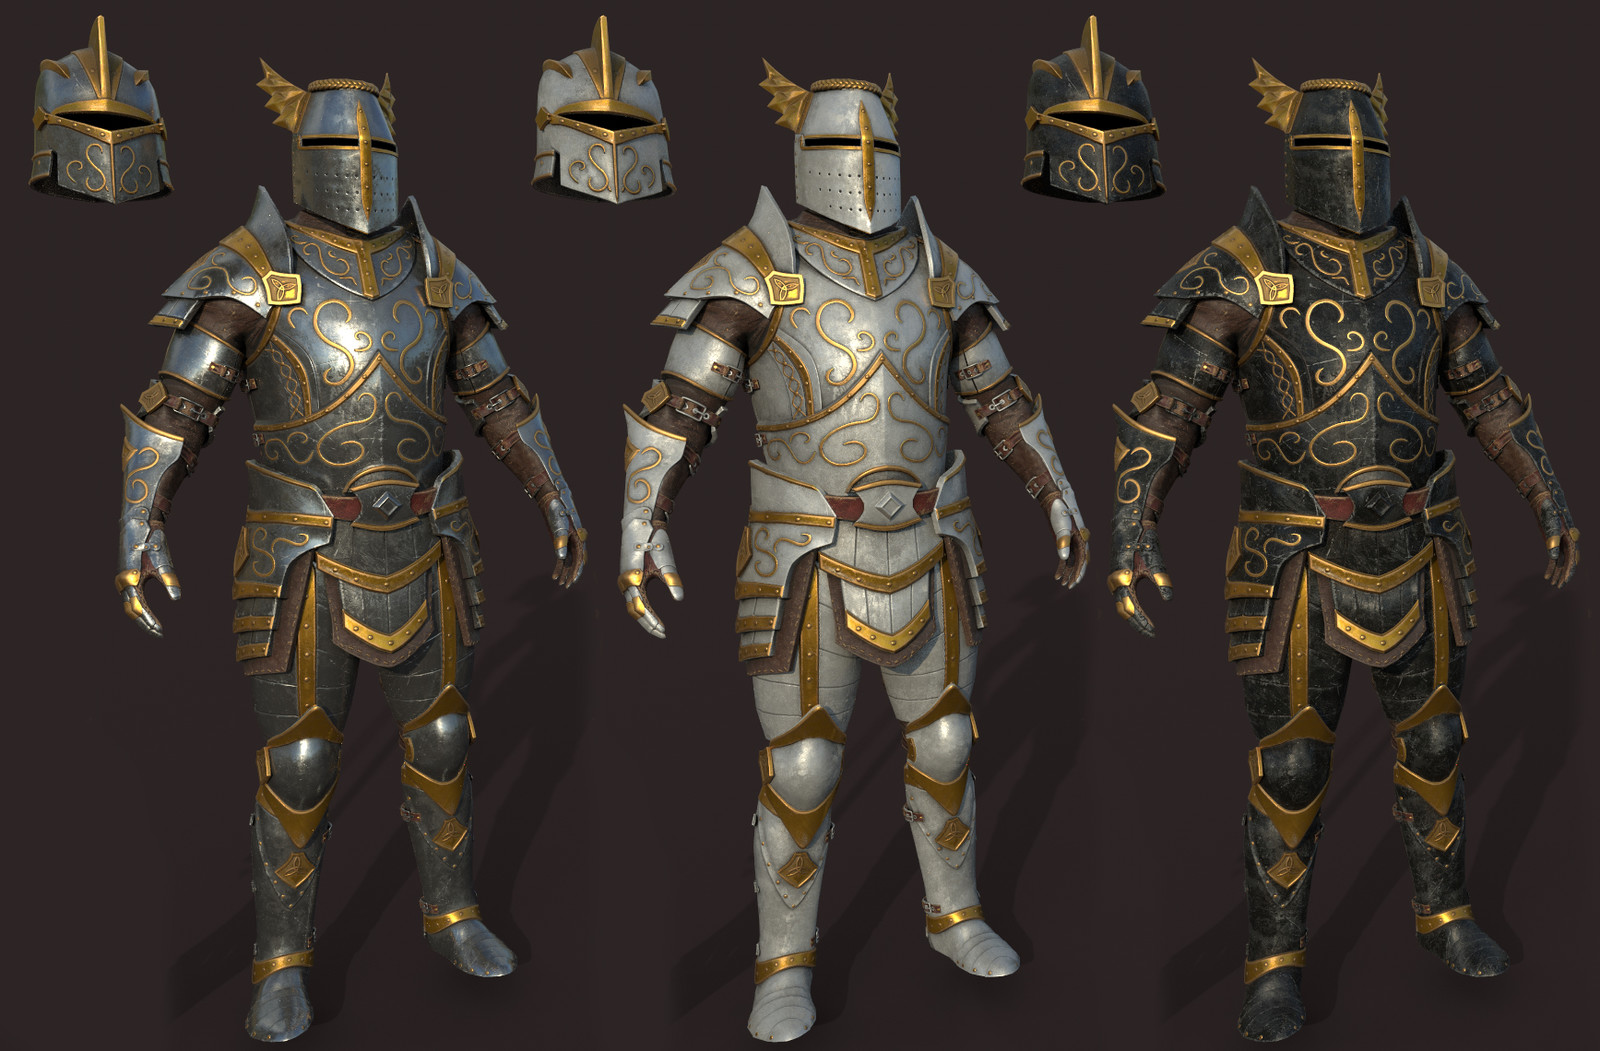 Paladin weapons and armor.